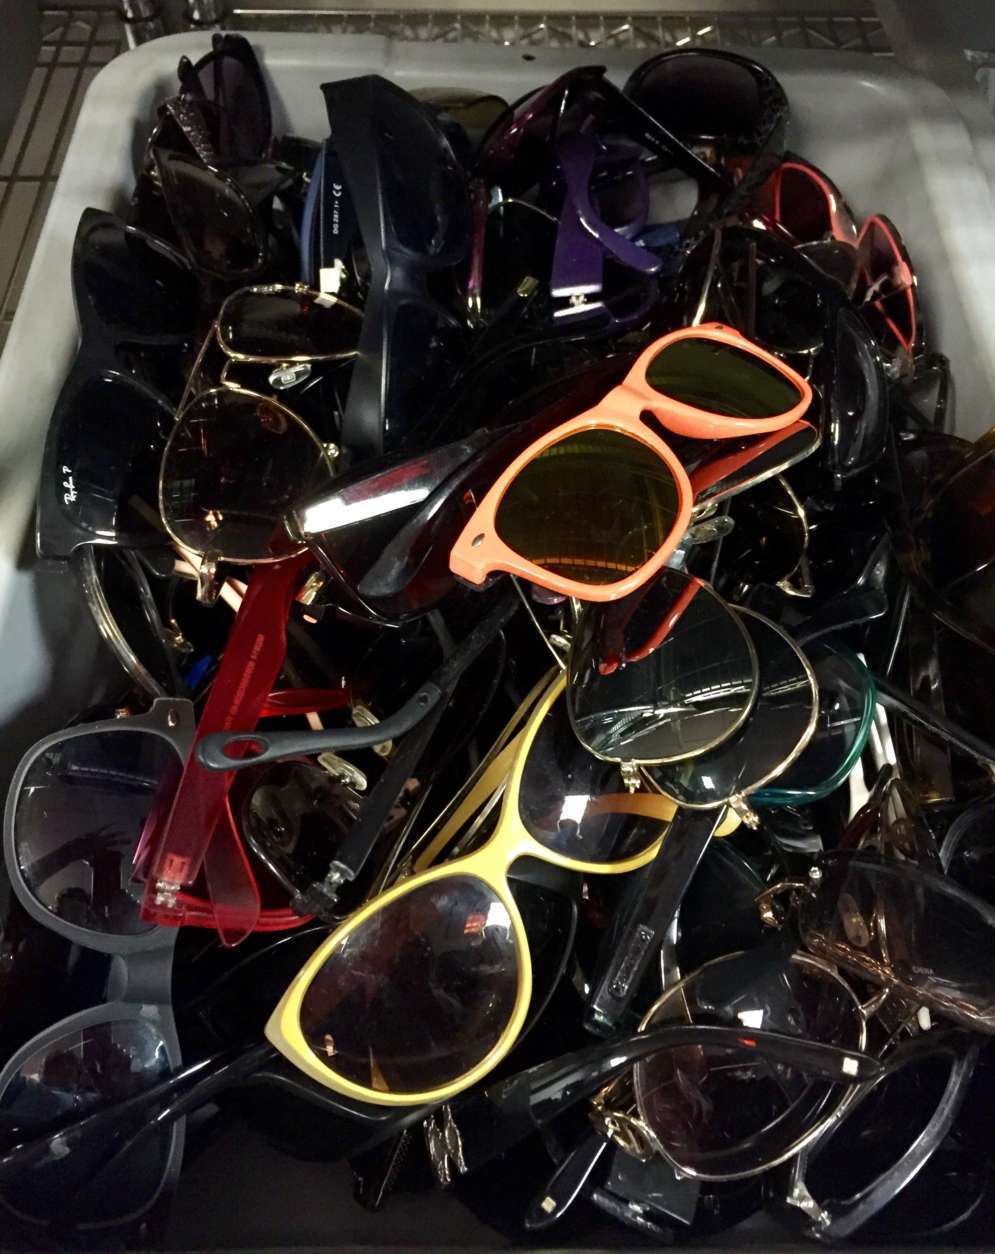 Here are the many sunglasses that are often left behind at TSA security checkpoints. (Courtesy TSA/Lisa Farbstein)